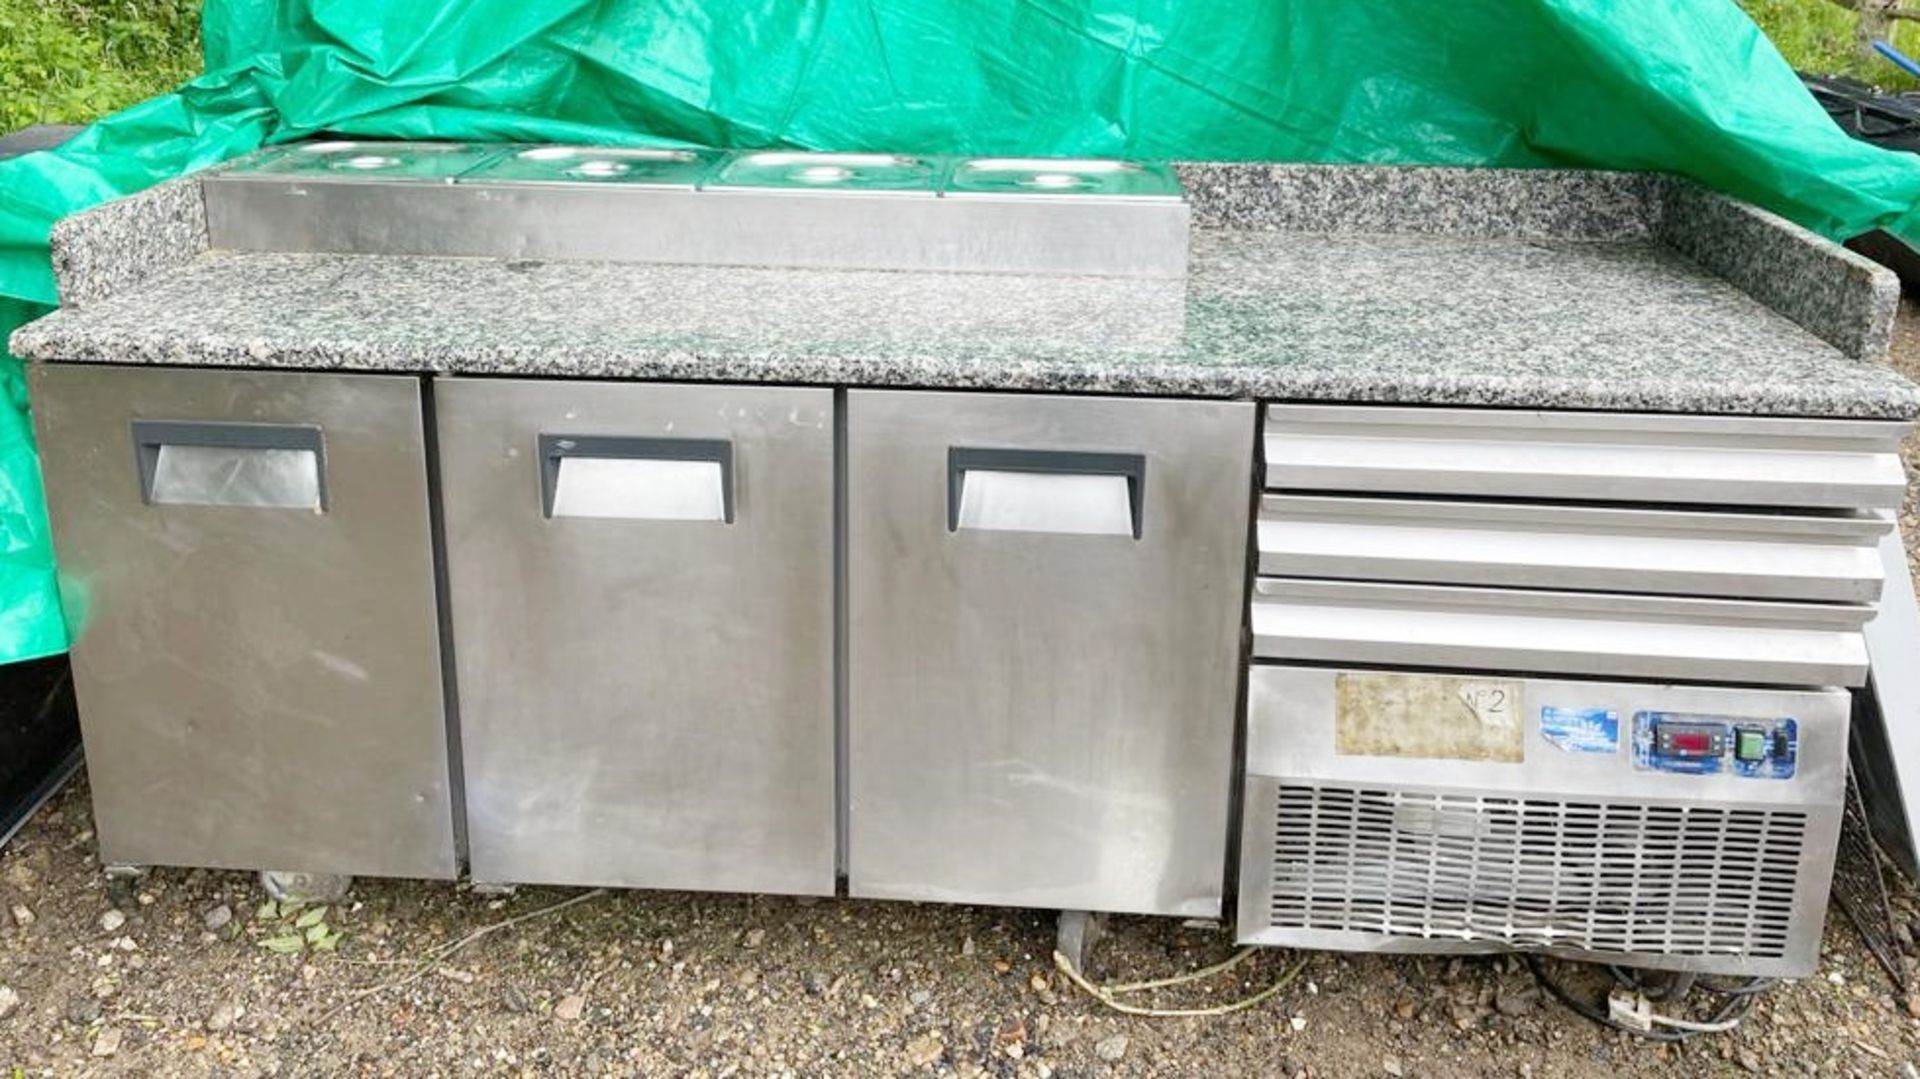 1 x Desmon Pizza Prep Counter With Three Door Refrigeration, Granite Work Top and Stainless Steel